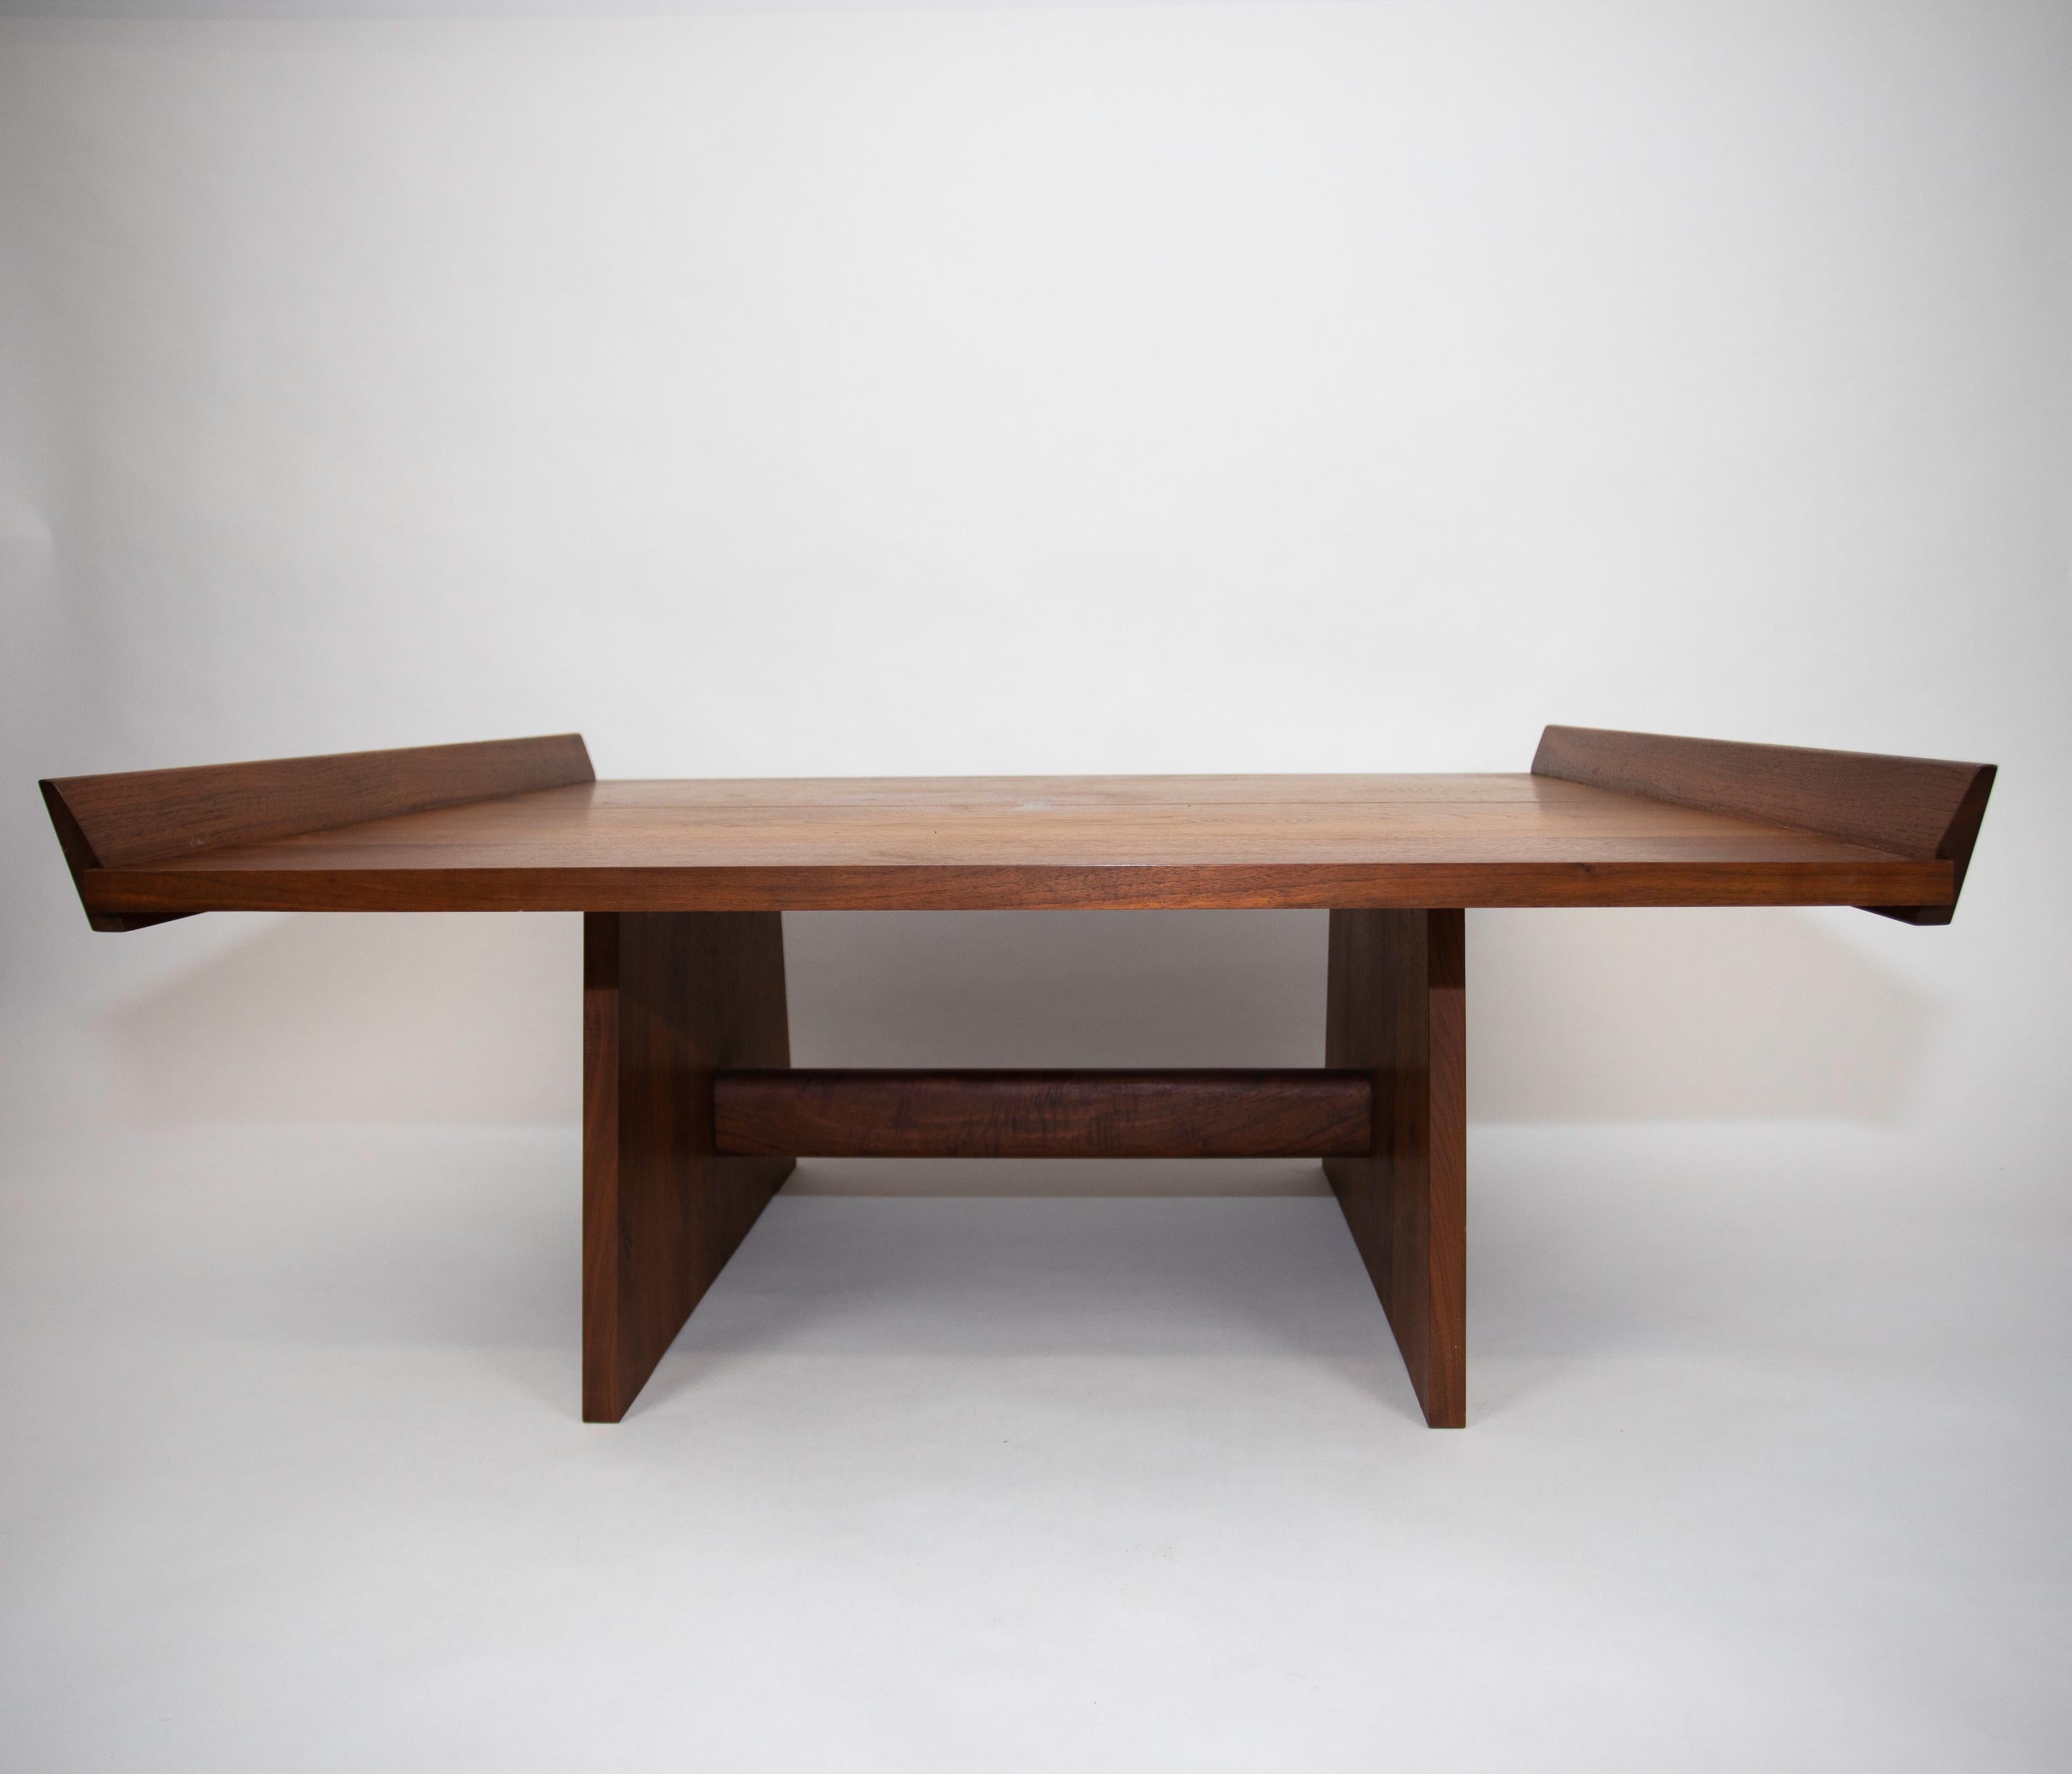 A Nakashima Studios Milkhouse table
Walnut with a rosewood butterfly
Great original surface
Signed Mira Nakashima with client's name below.